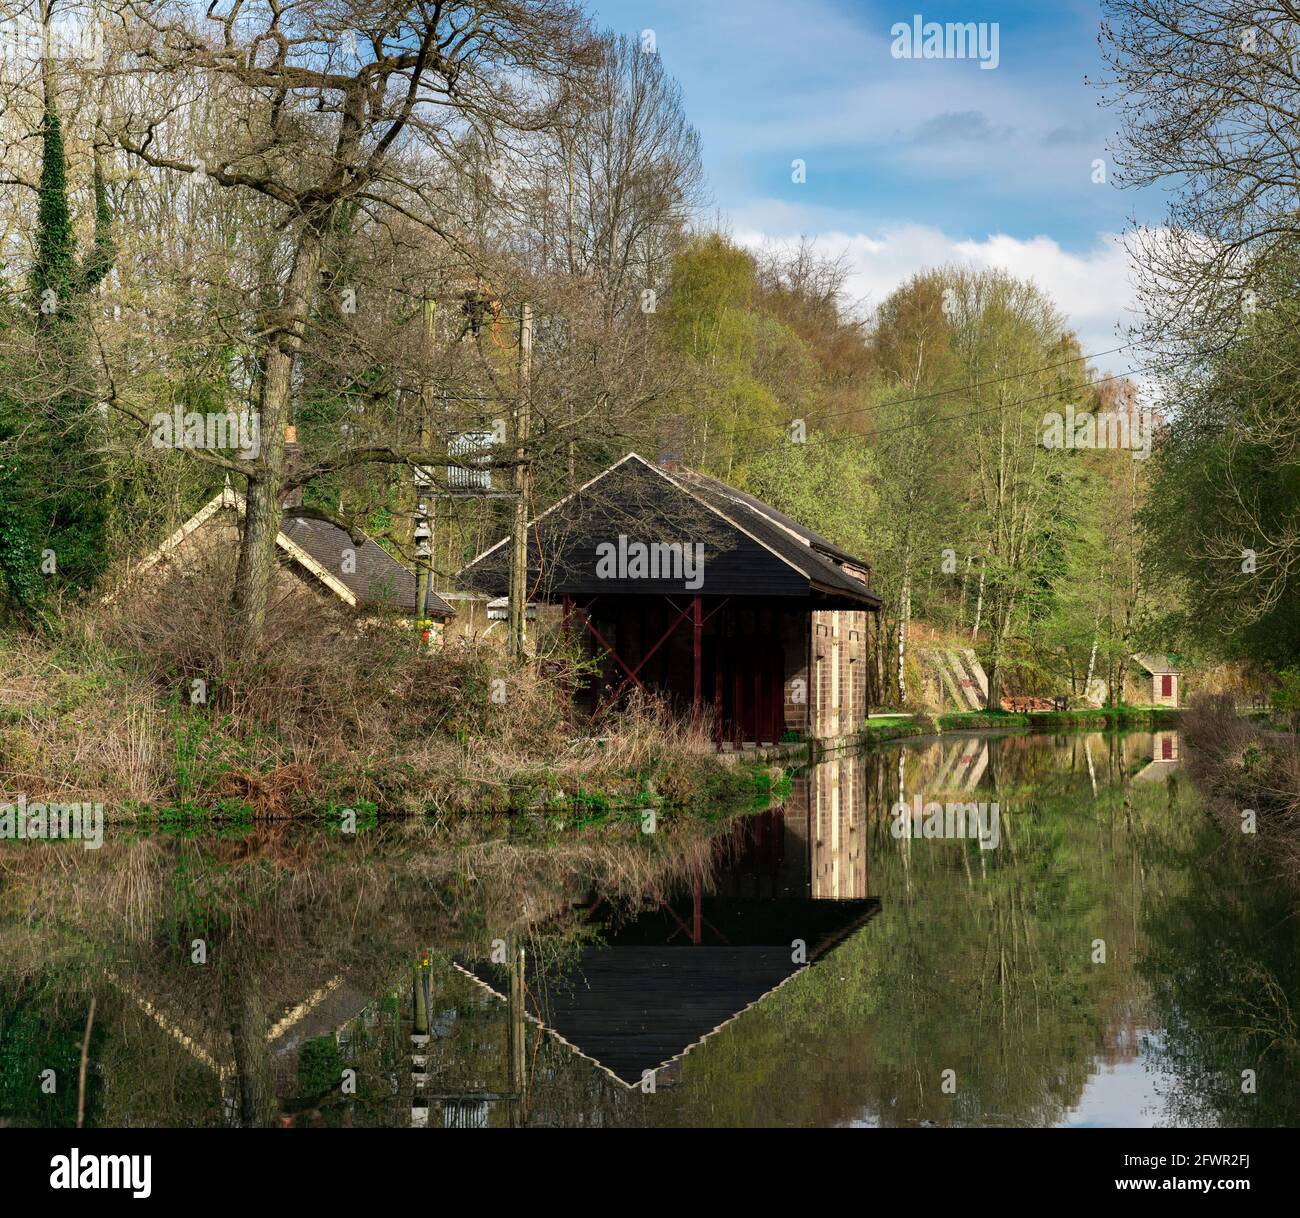 Cromford Canal, The wharf shed, Cromford, Derbyshire peak district, England, UK Stock Photo